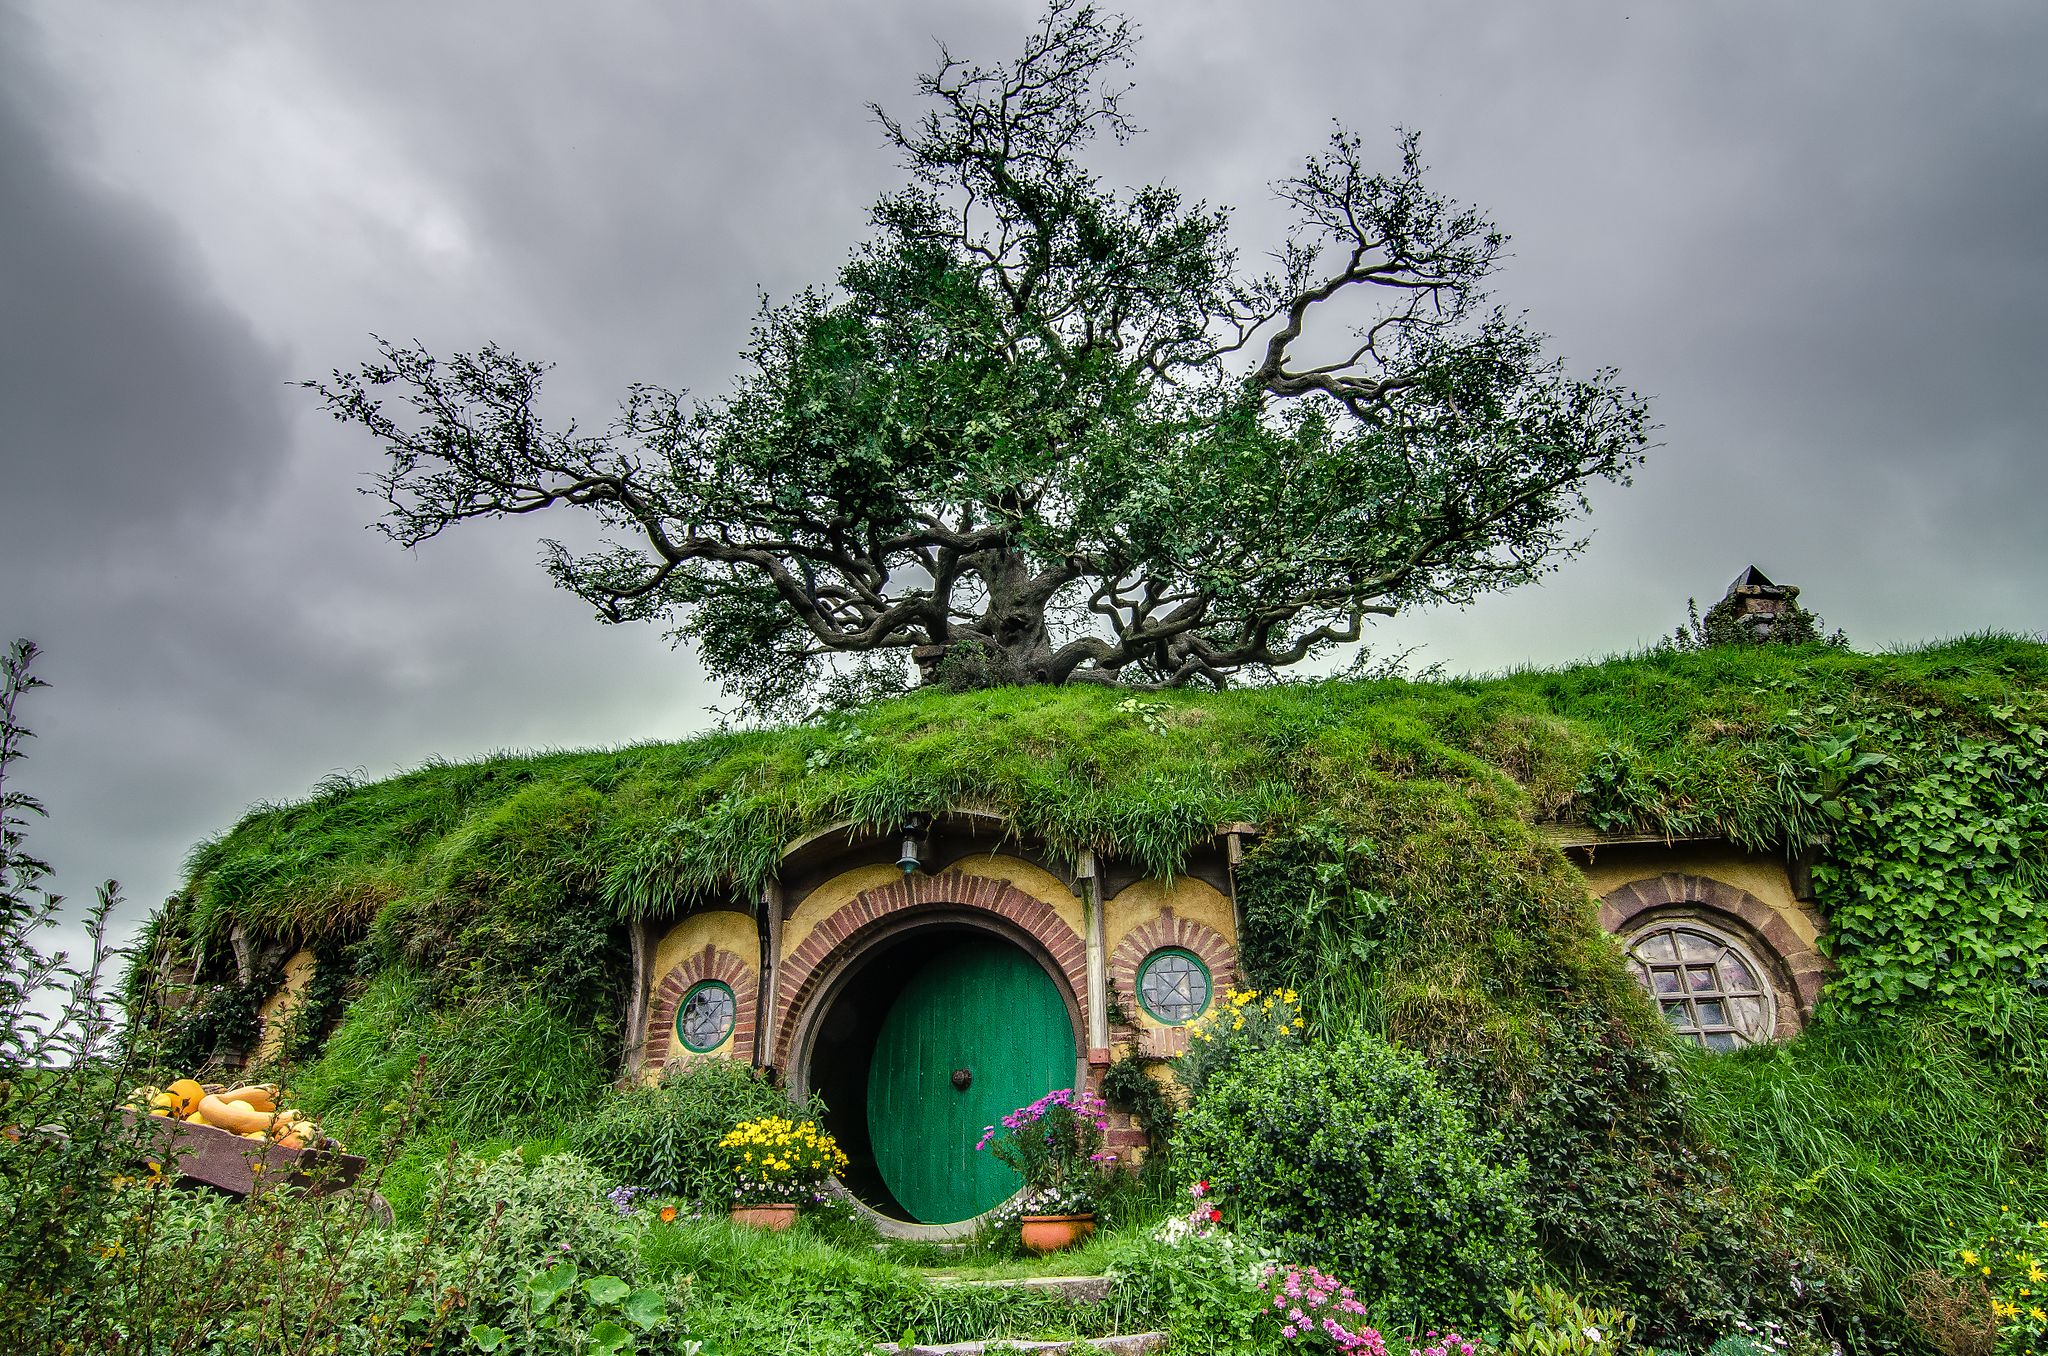 The Shire